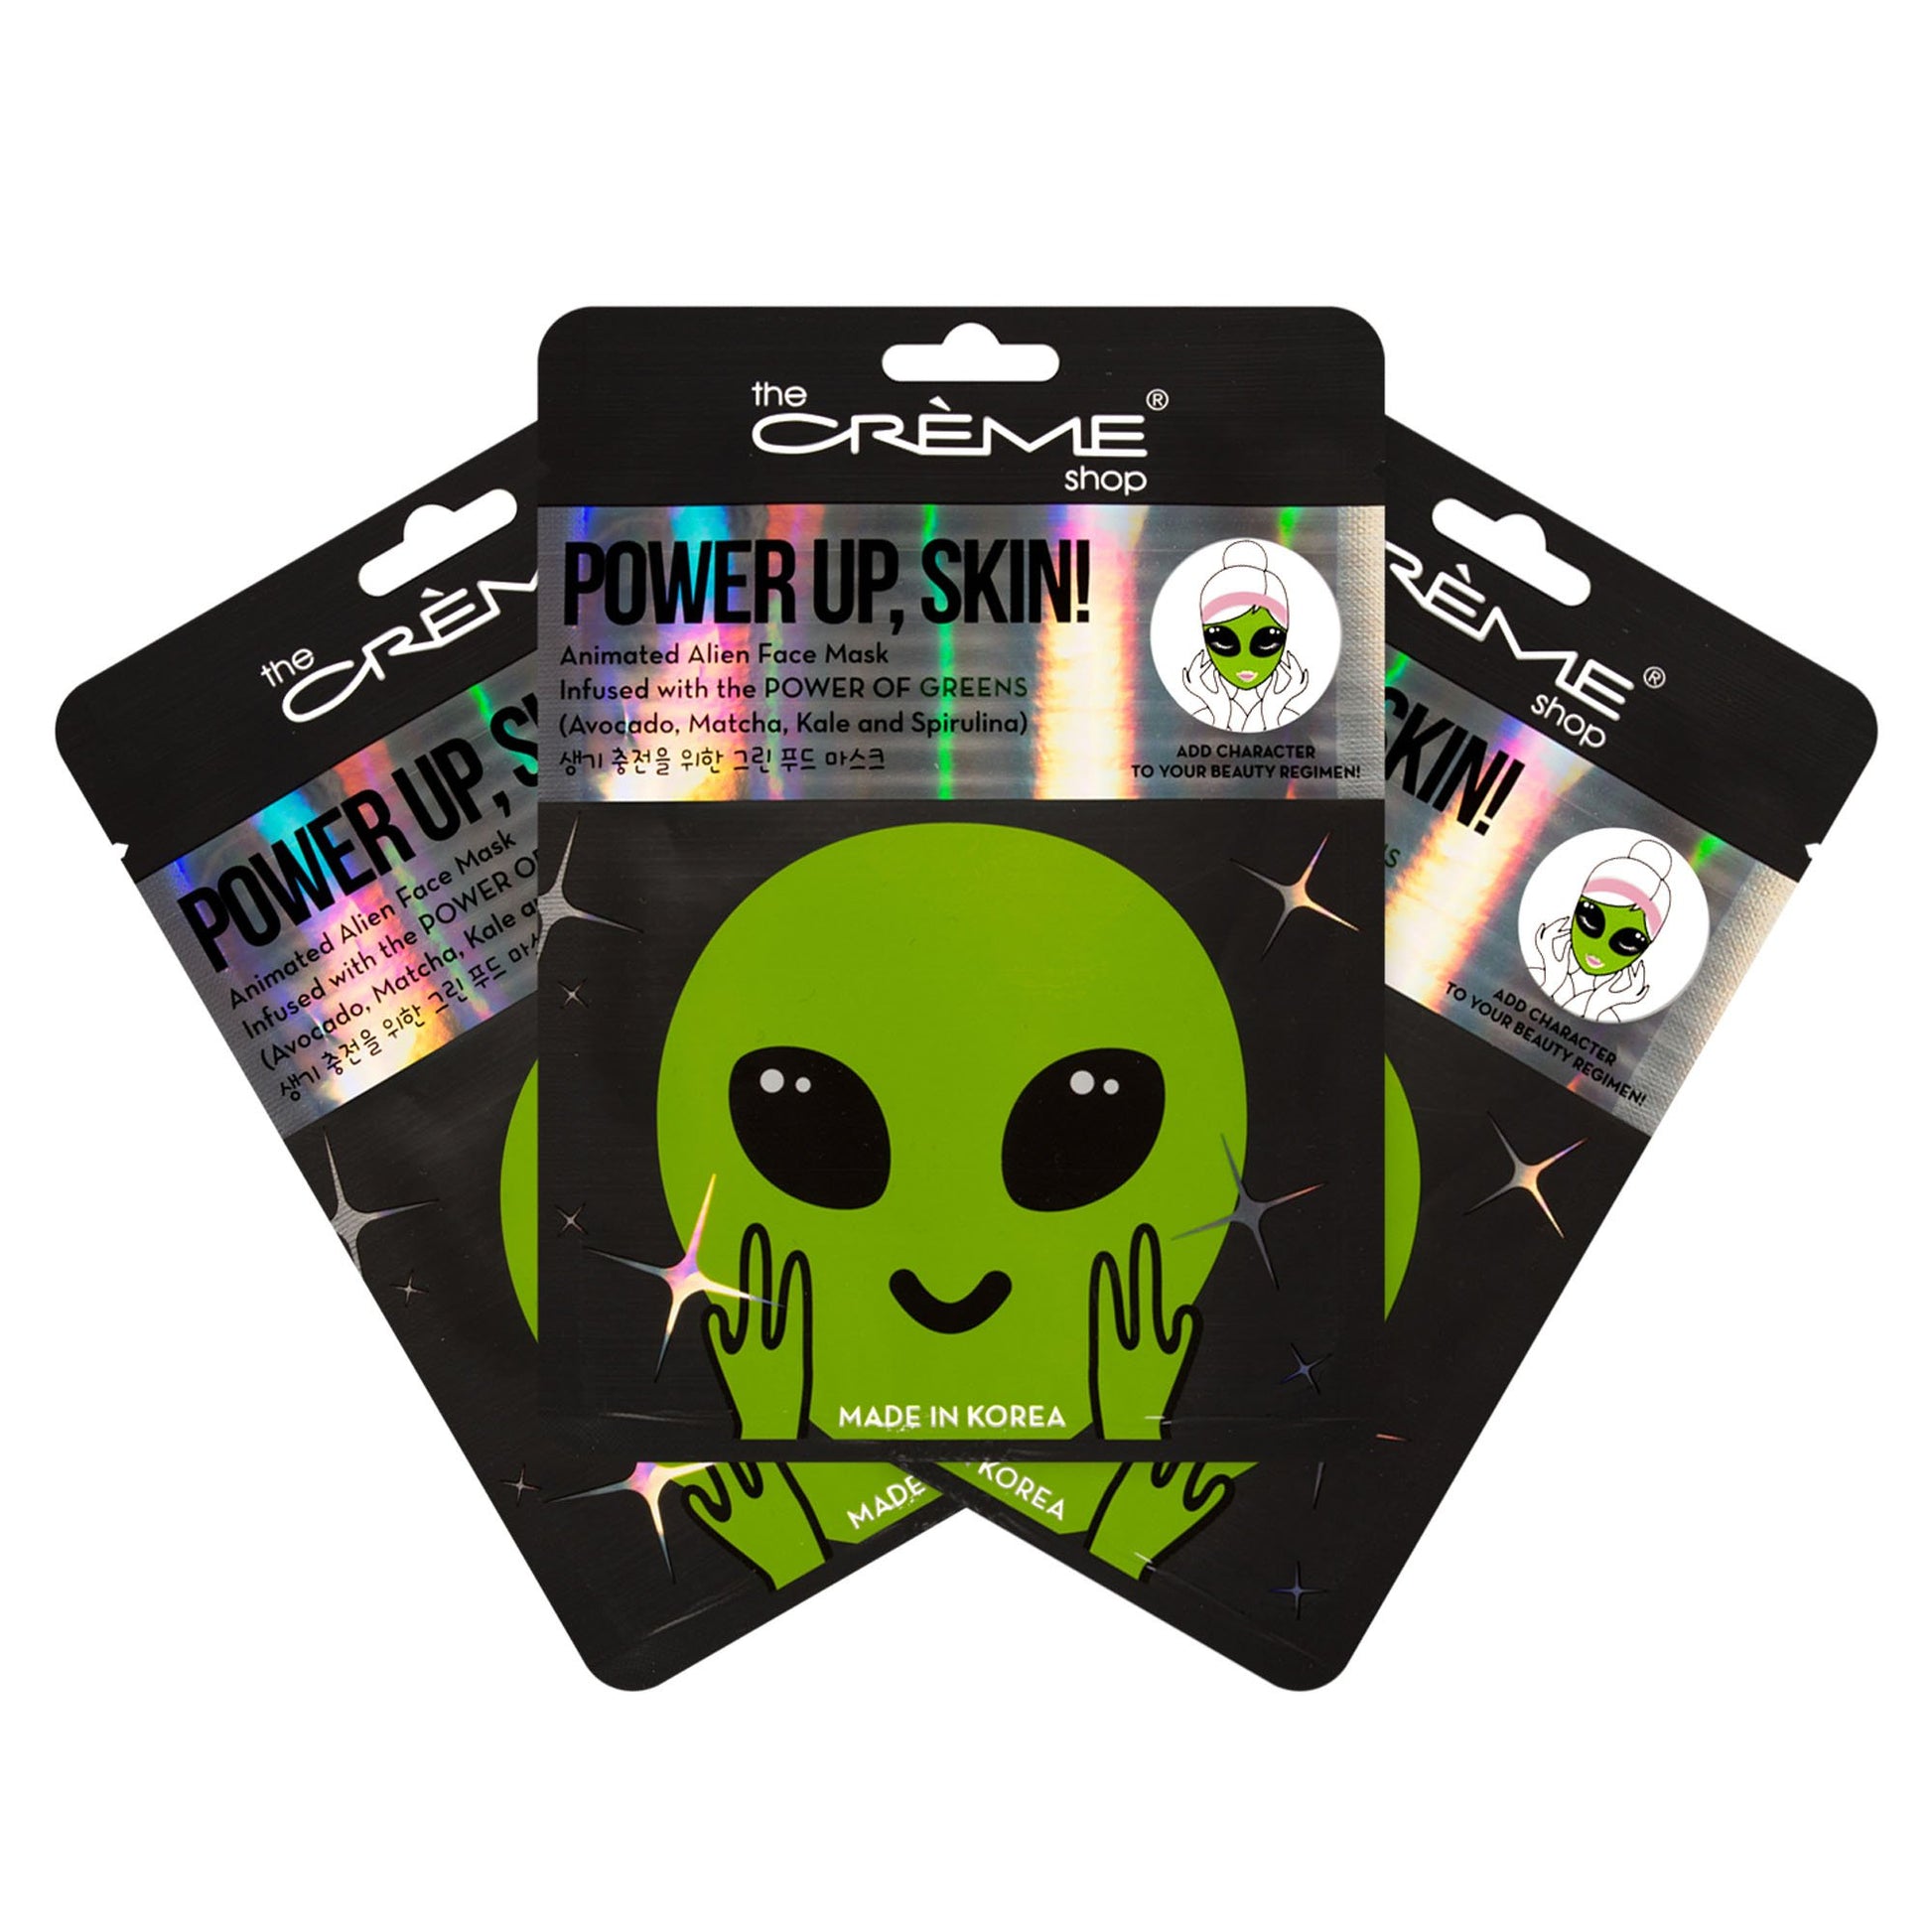 Power Up, Animated Alien Face Mask - Power of Greens – The Crème Shop